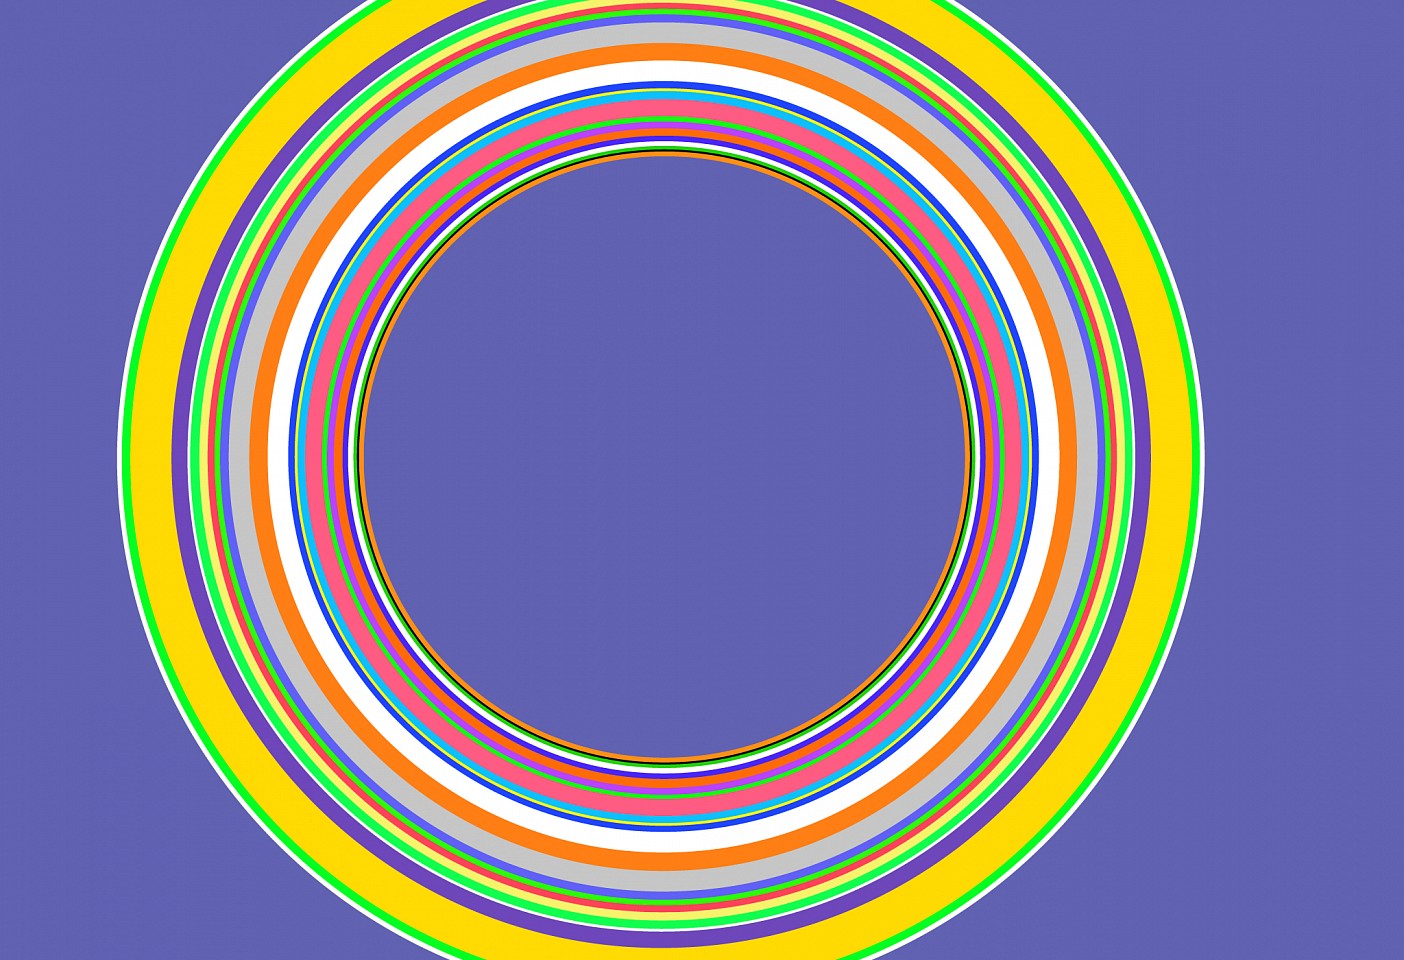 Dane Albert, Circles #42, 2023
Acrylic on canvas (Concept), 48 x 72 in. (121.9 x 182.9 cm)
Series of colored lines and shapes in multiple configurations
DA.2023-042